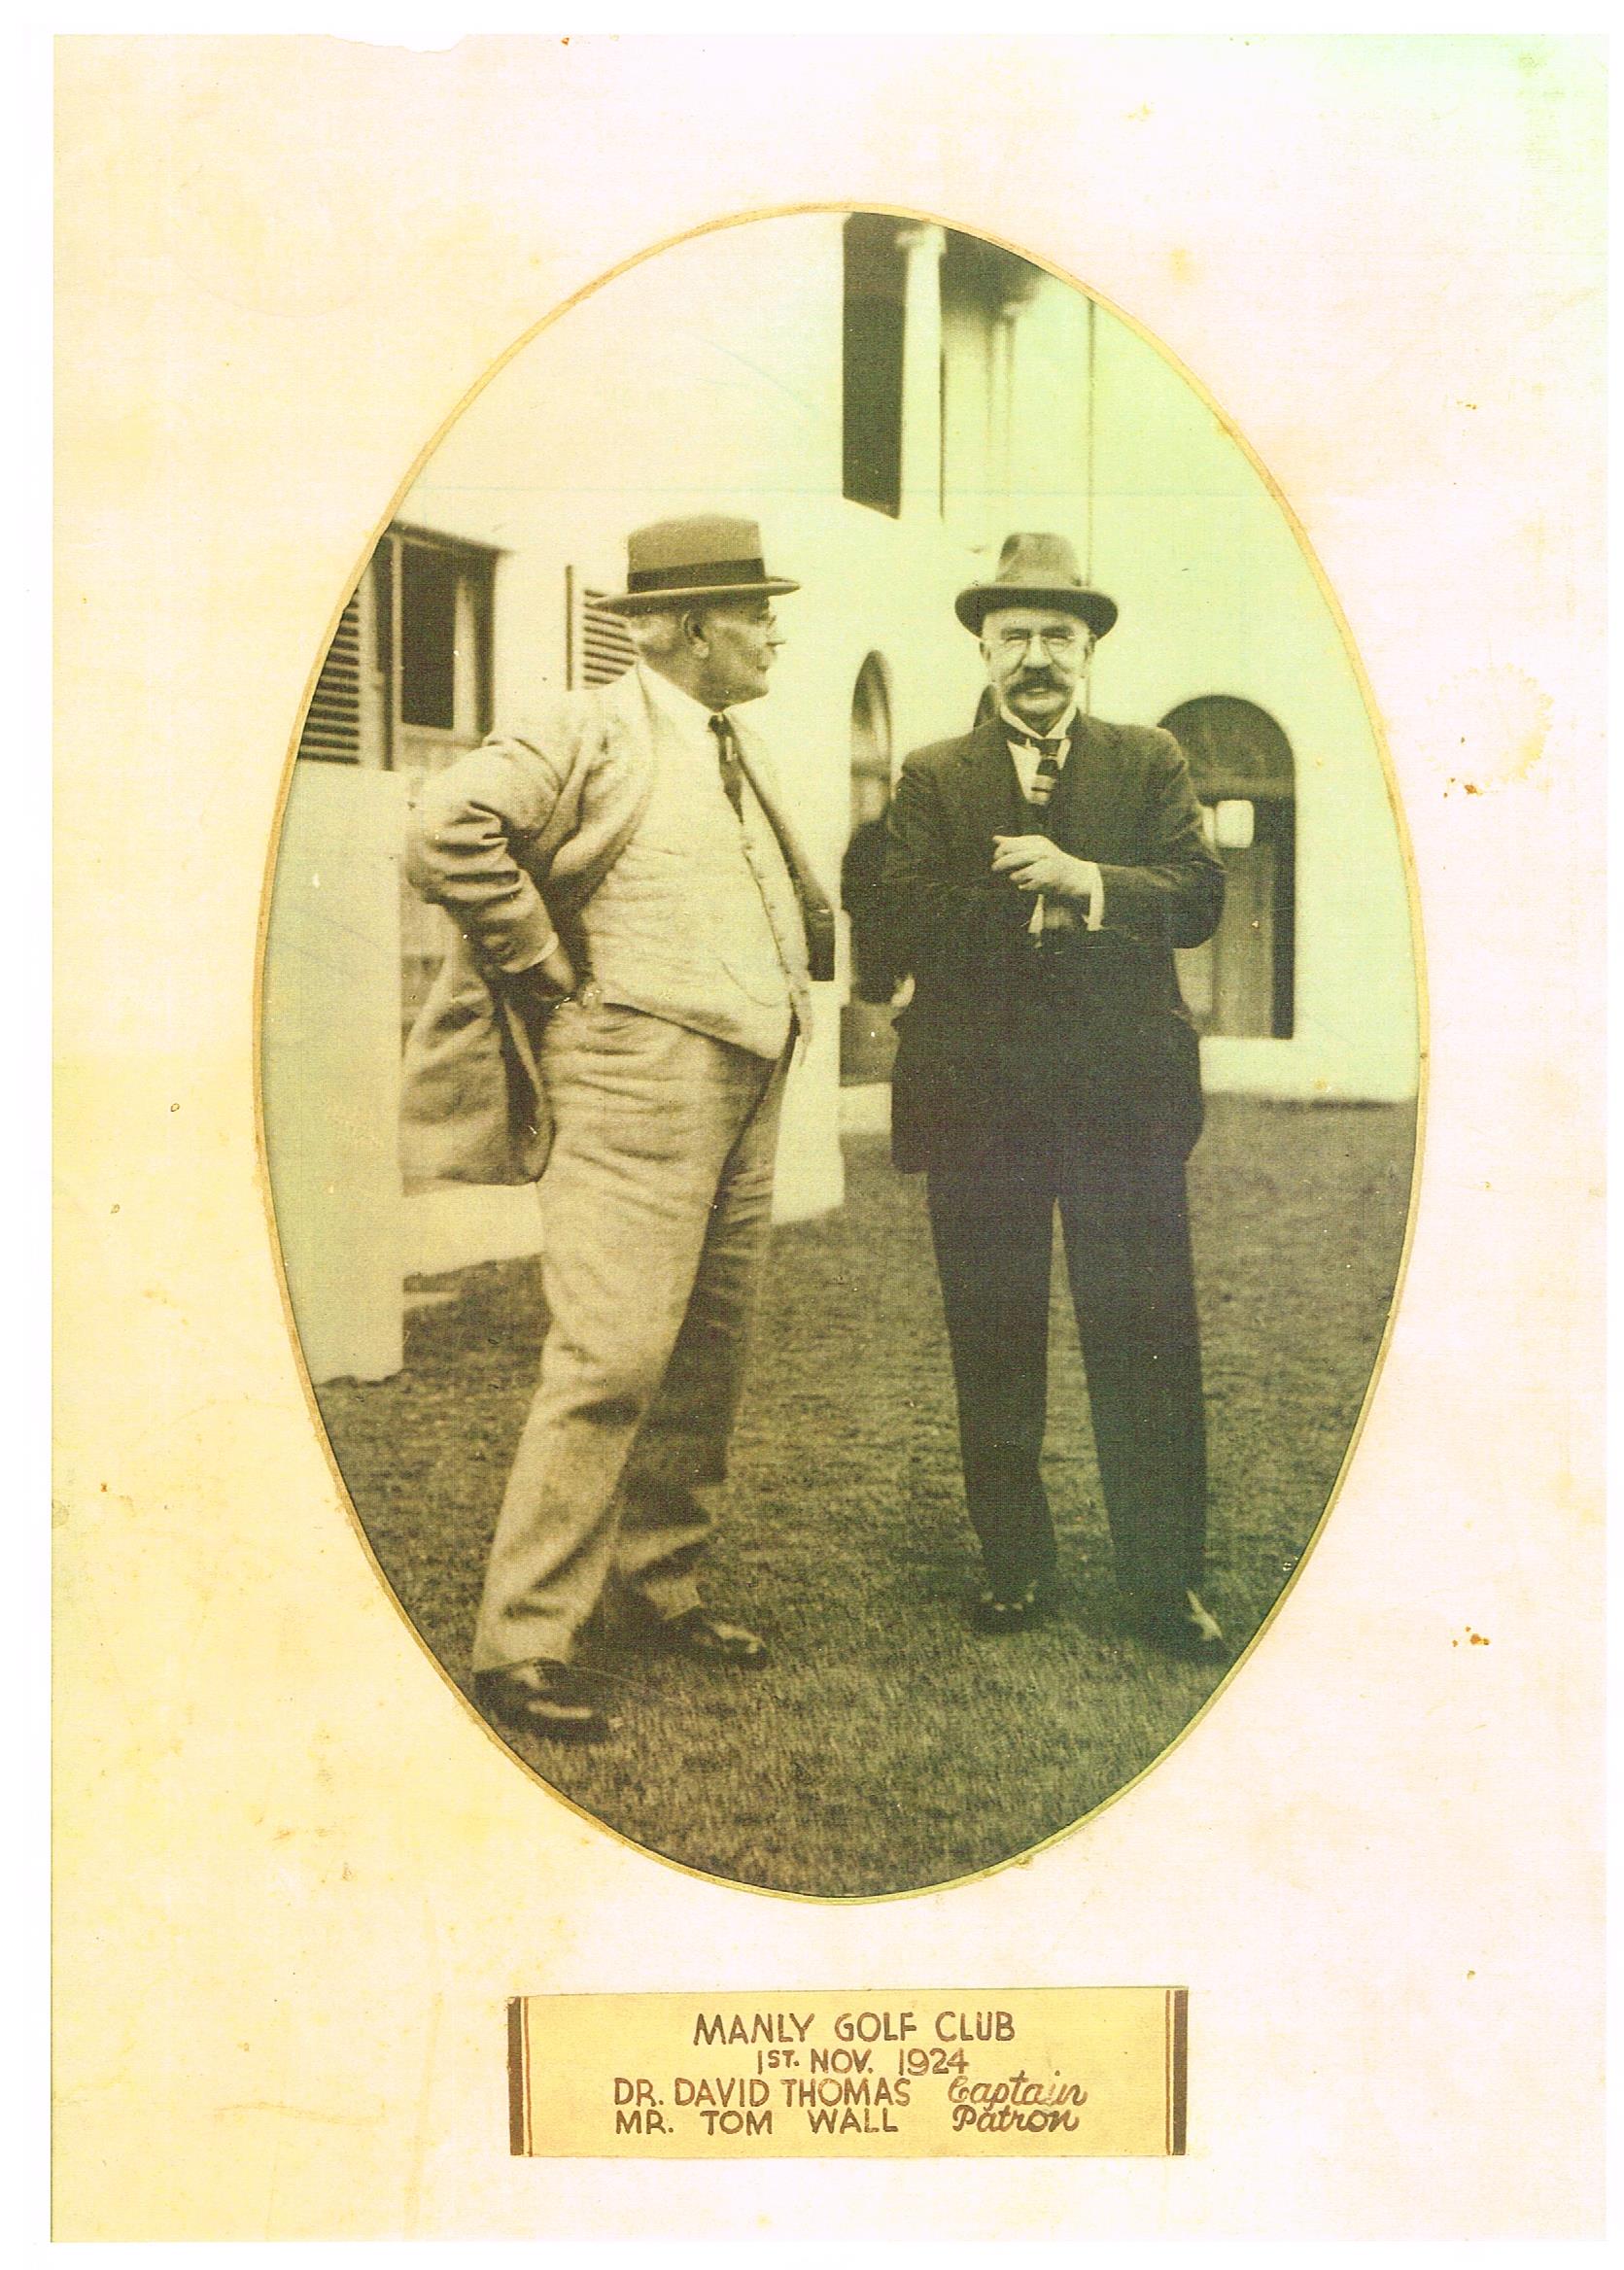 1924 Nov 1 Dr David Thomas (Club Capt), Thomas Wall (Patron) official opening of the Manly Golf Club clubhouse